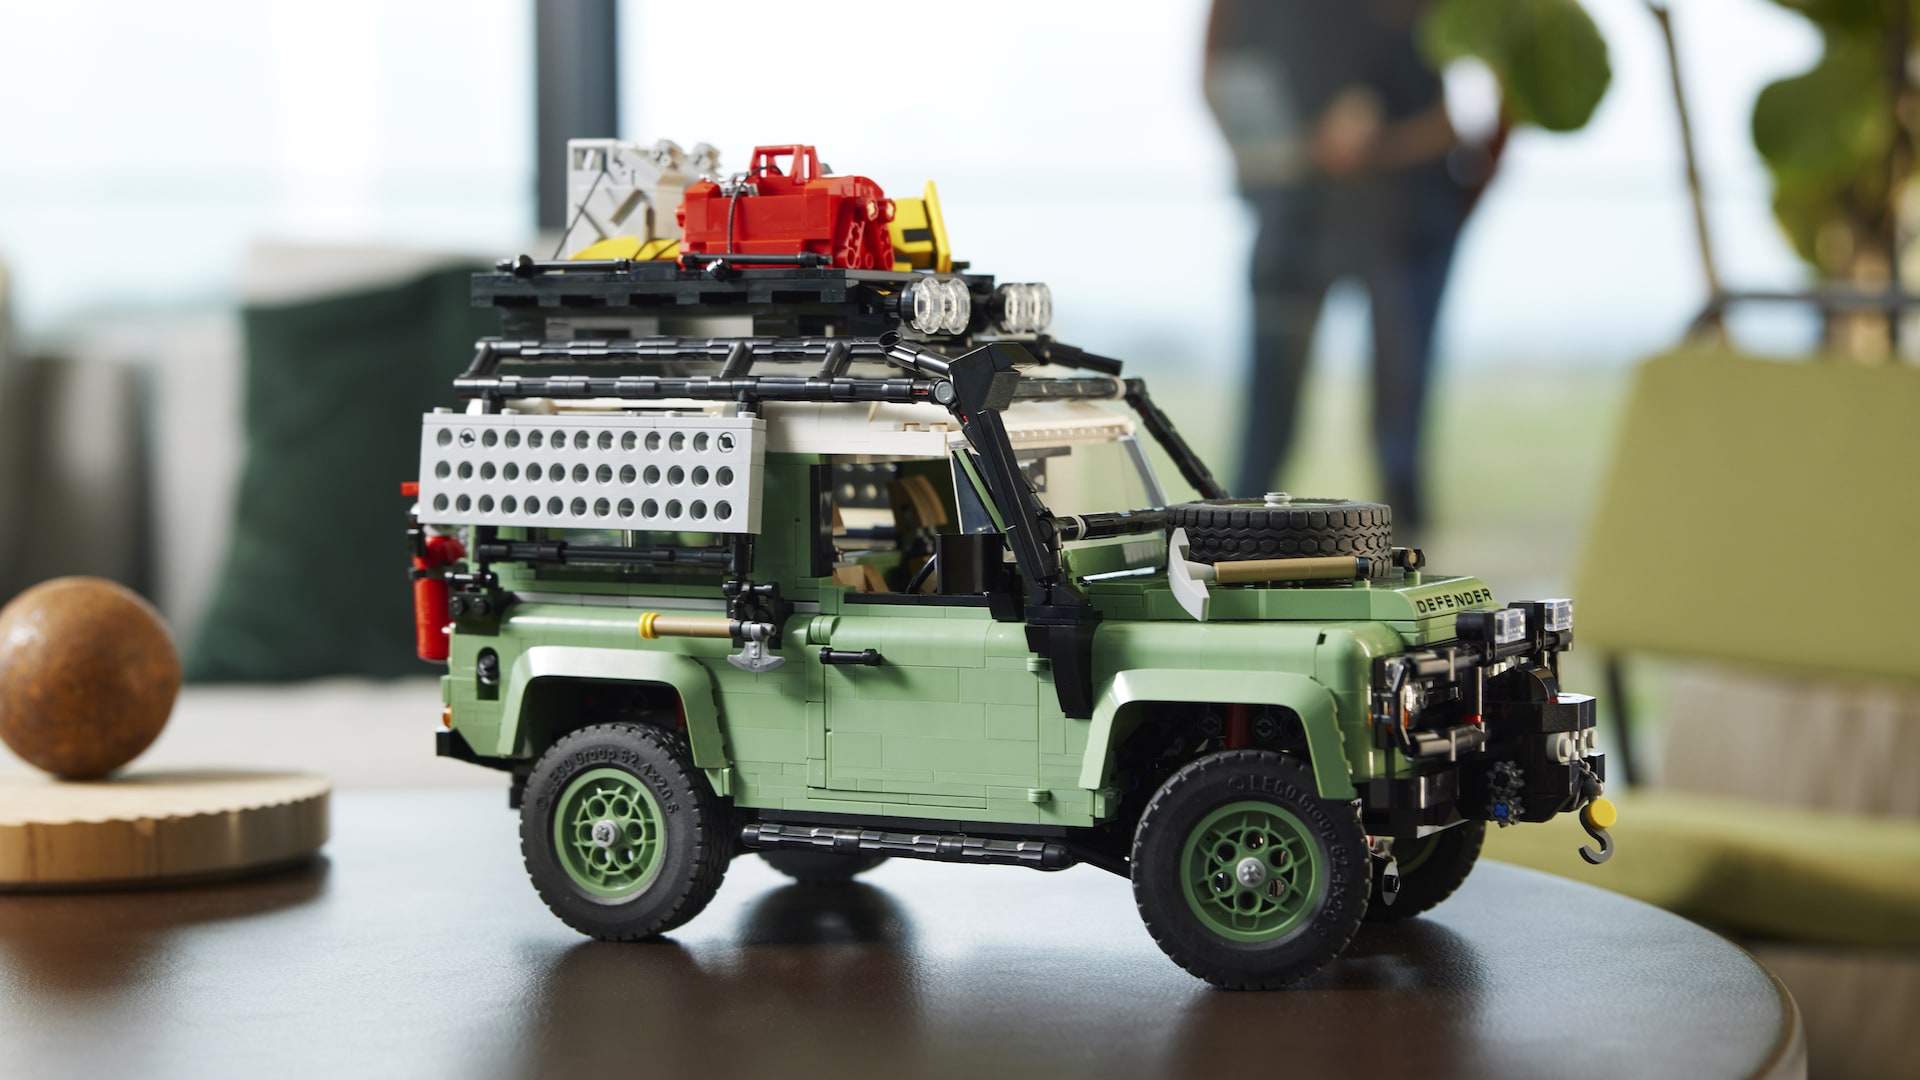 Lego salutes Land Rover's 75th anniversary with classic Defender